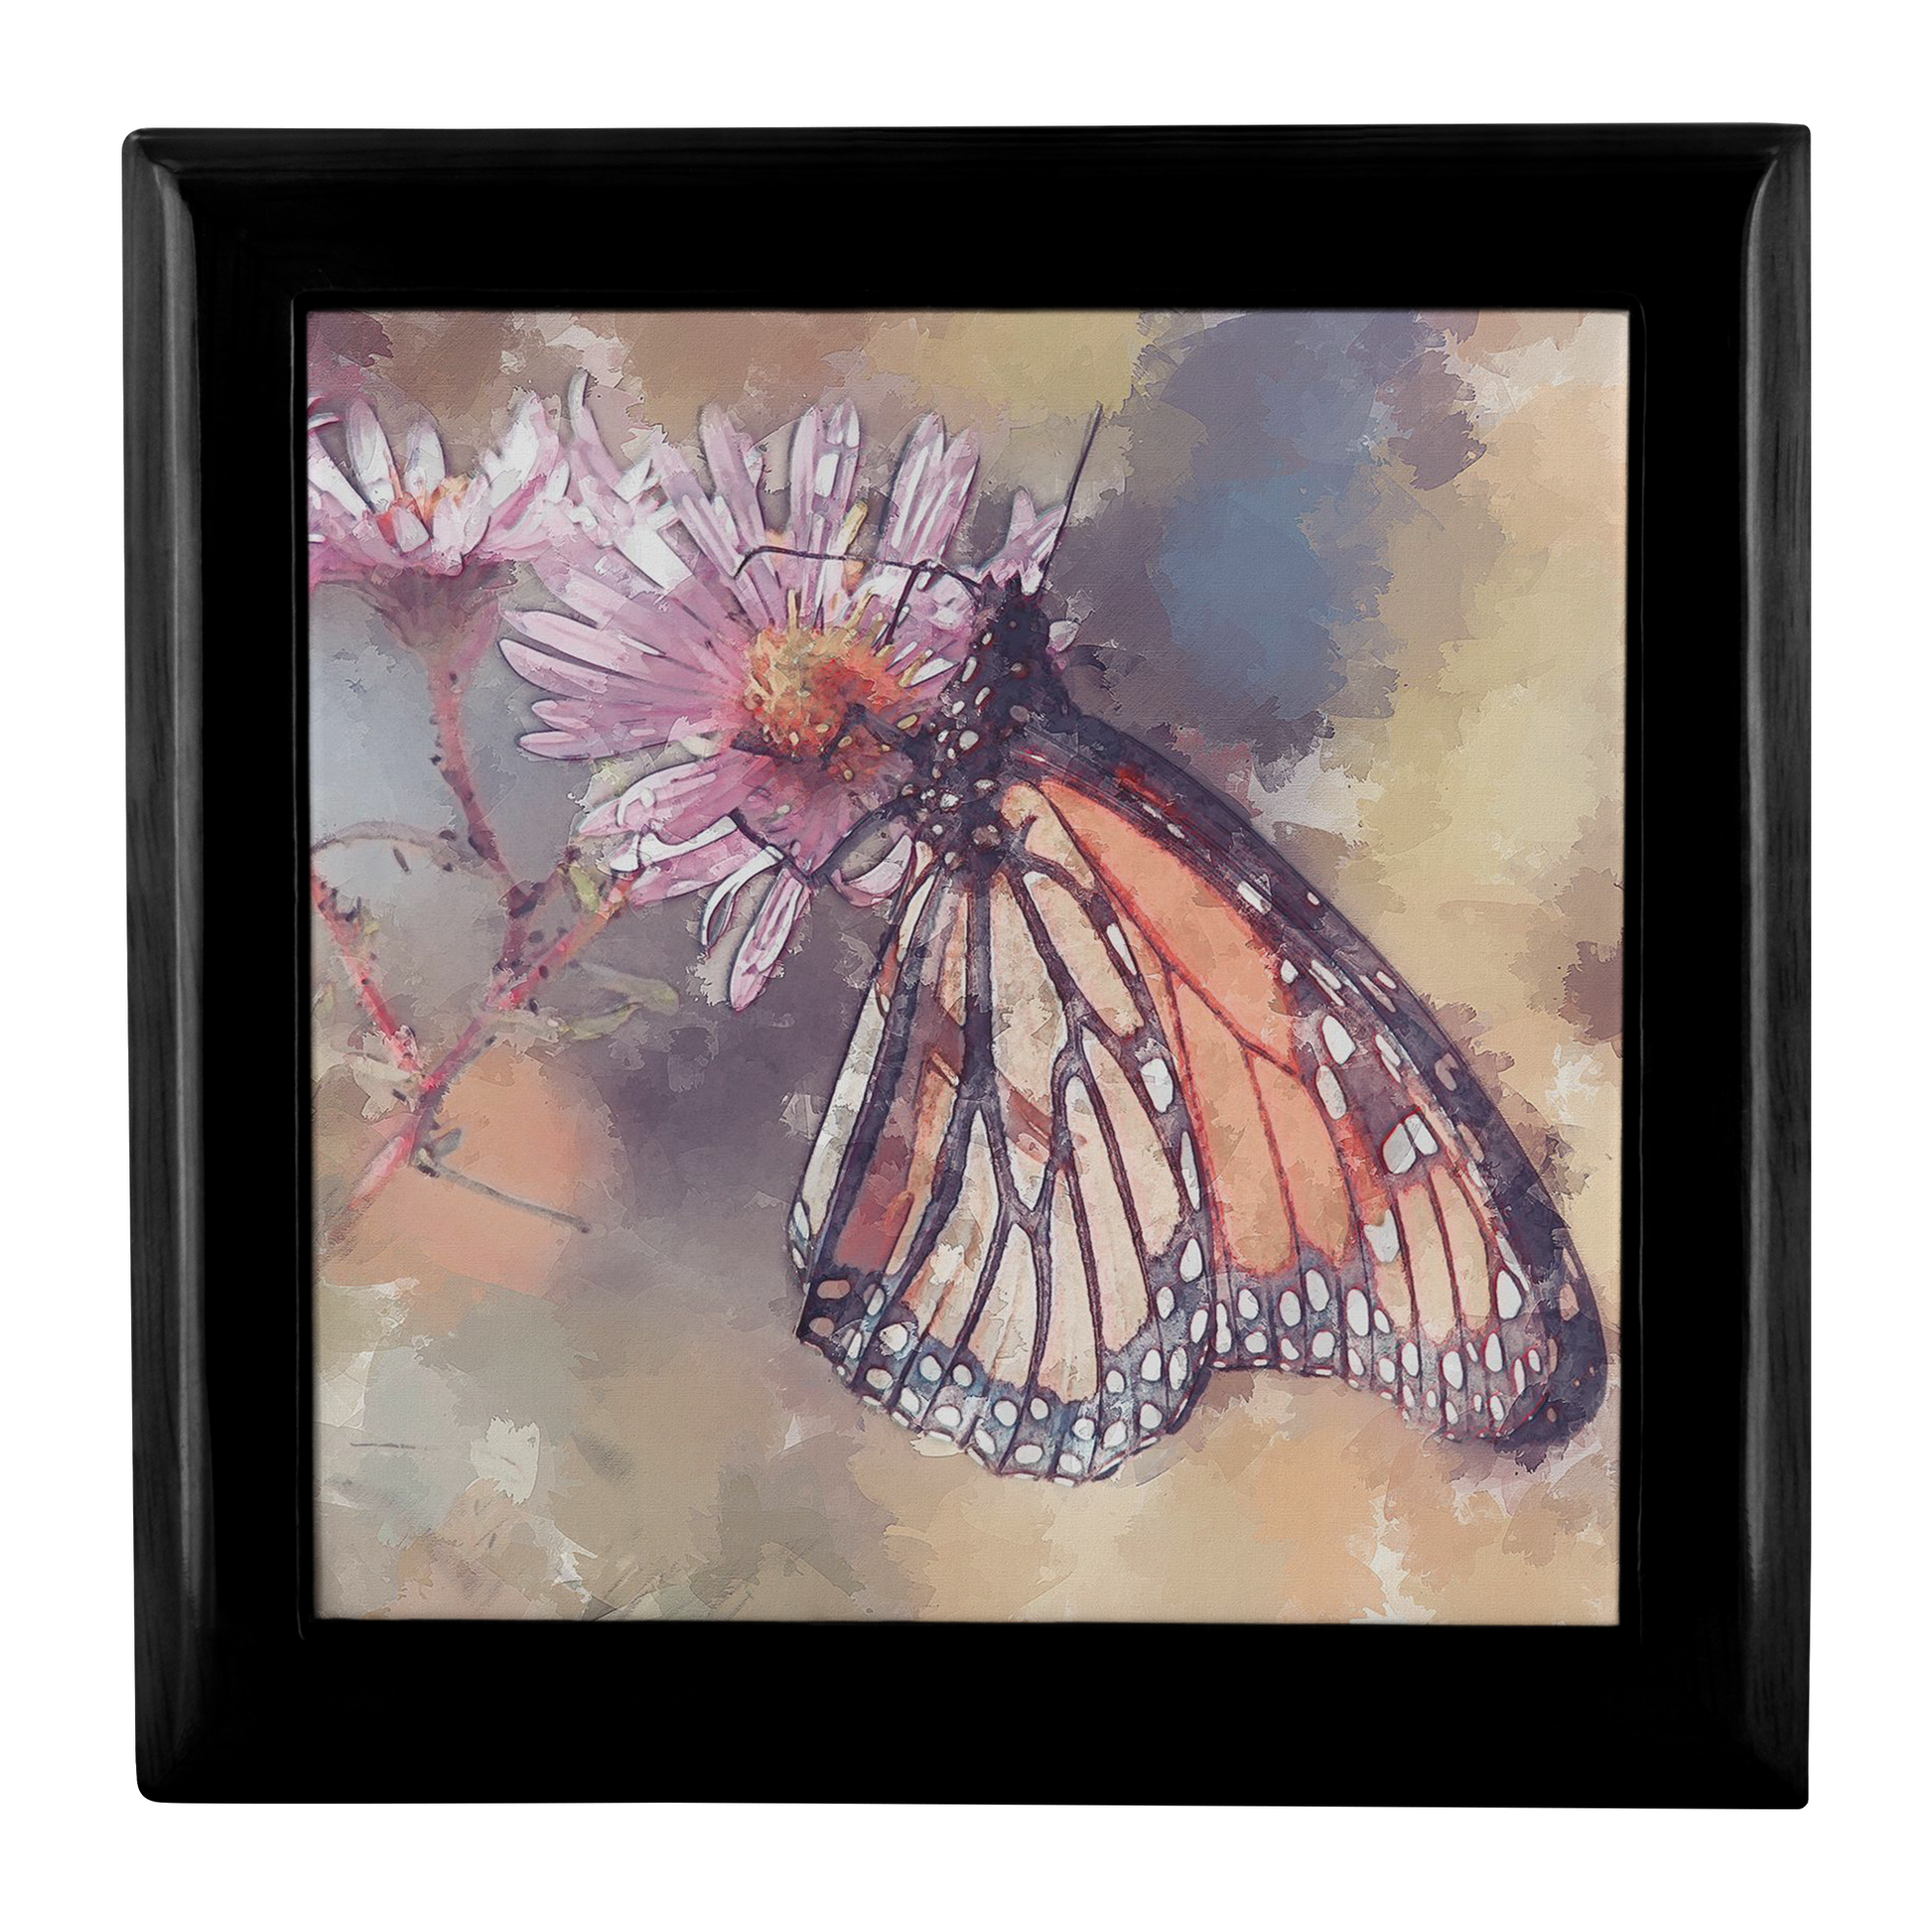 Painted Style Monarch Butterfly Jewelry Box - Schoppix Gifts